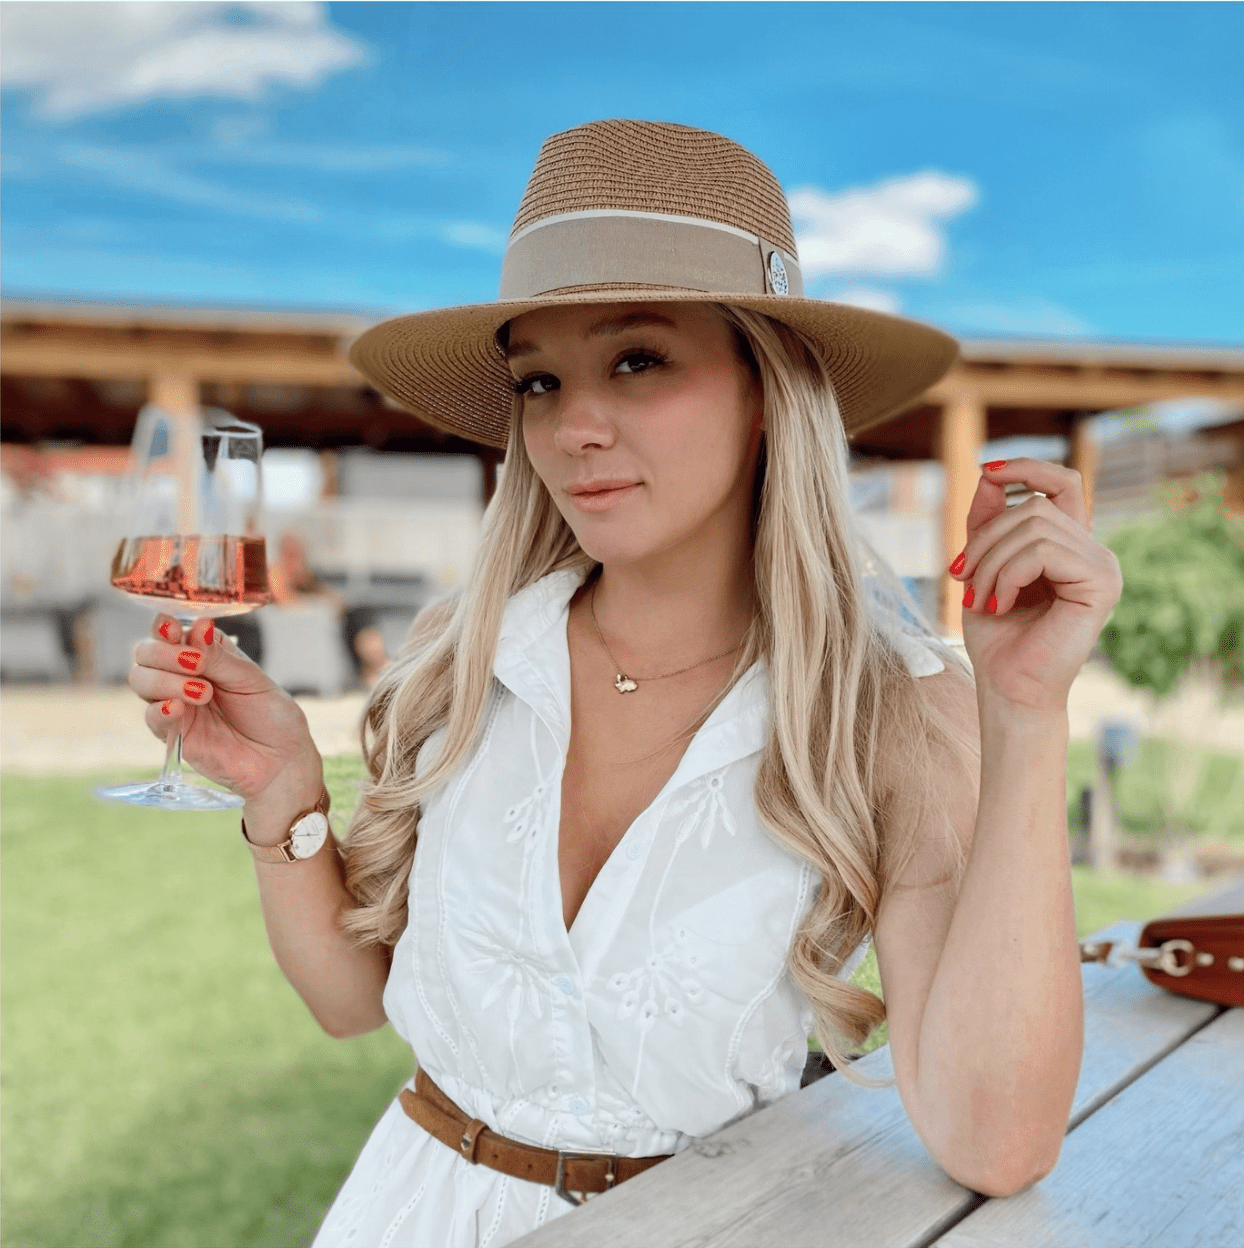 a woman with long blonde hair holds a glass of rose and wears a hat